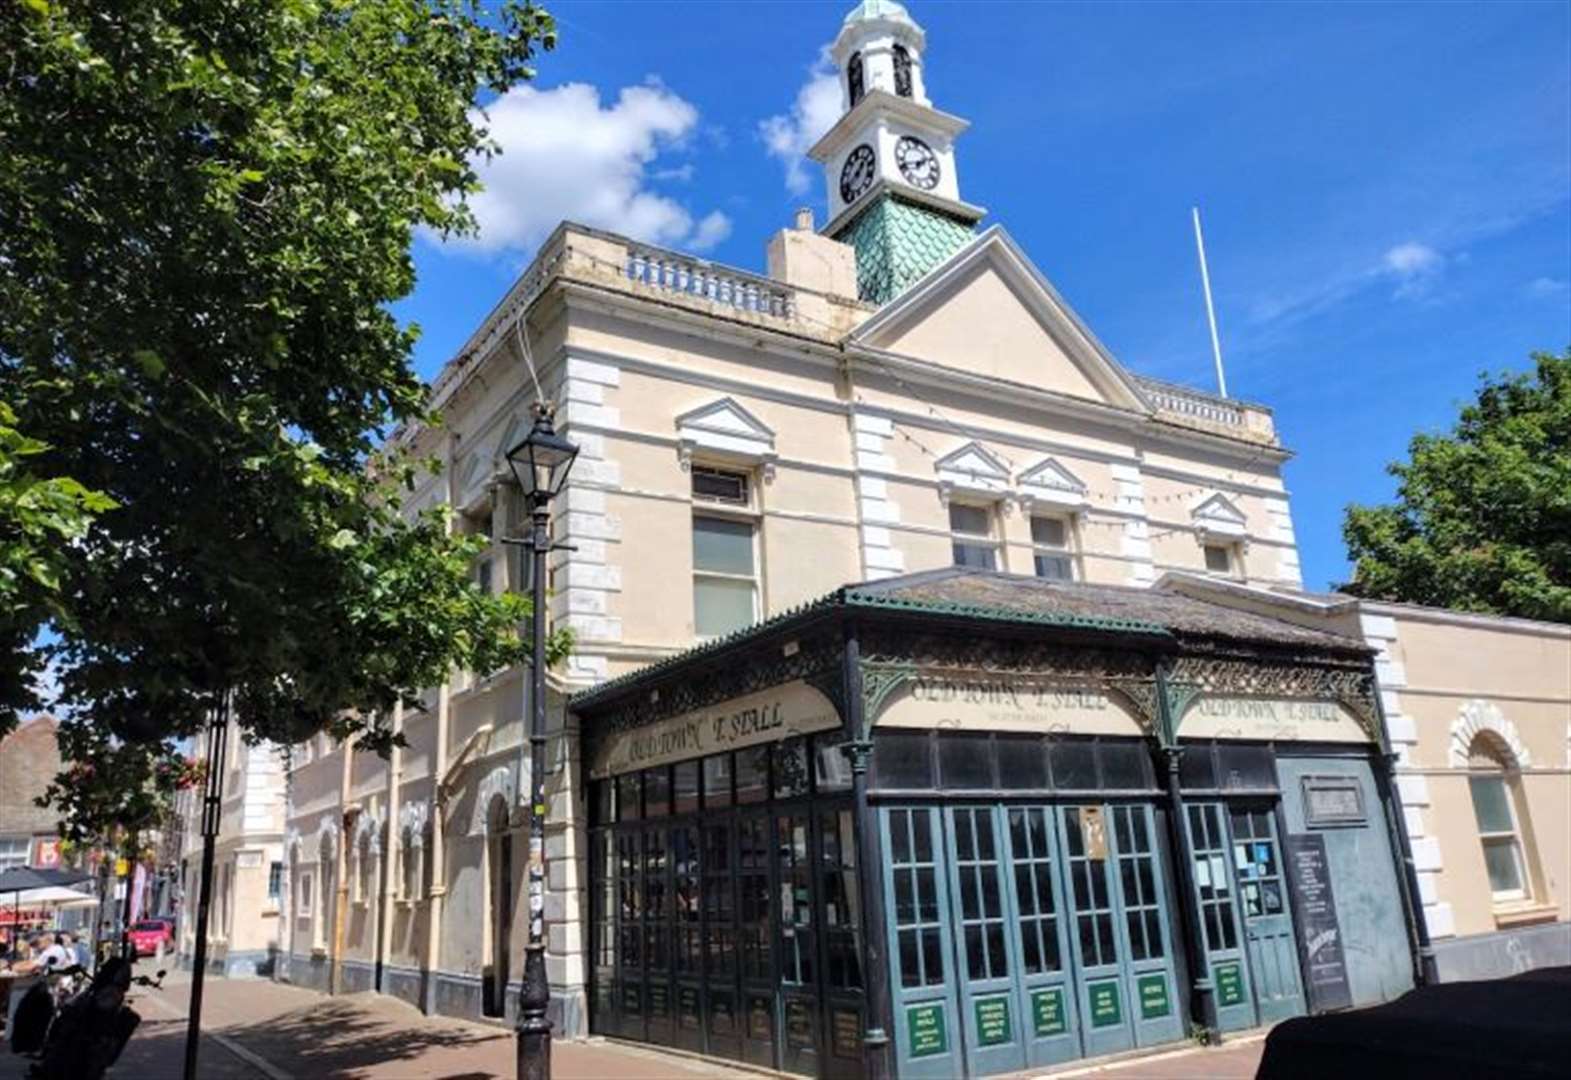 'Decaying' town hall could be turned into 'boutique hotel or shop'